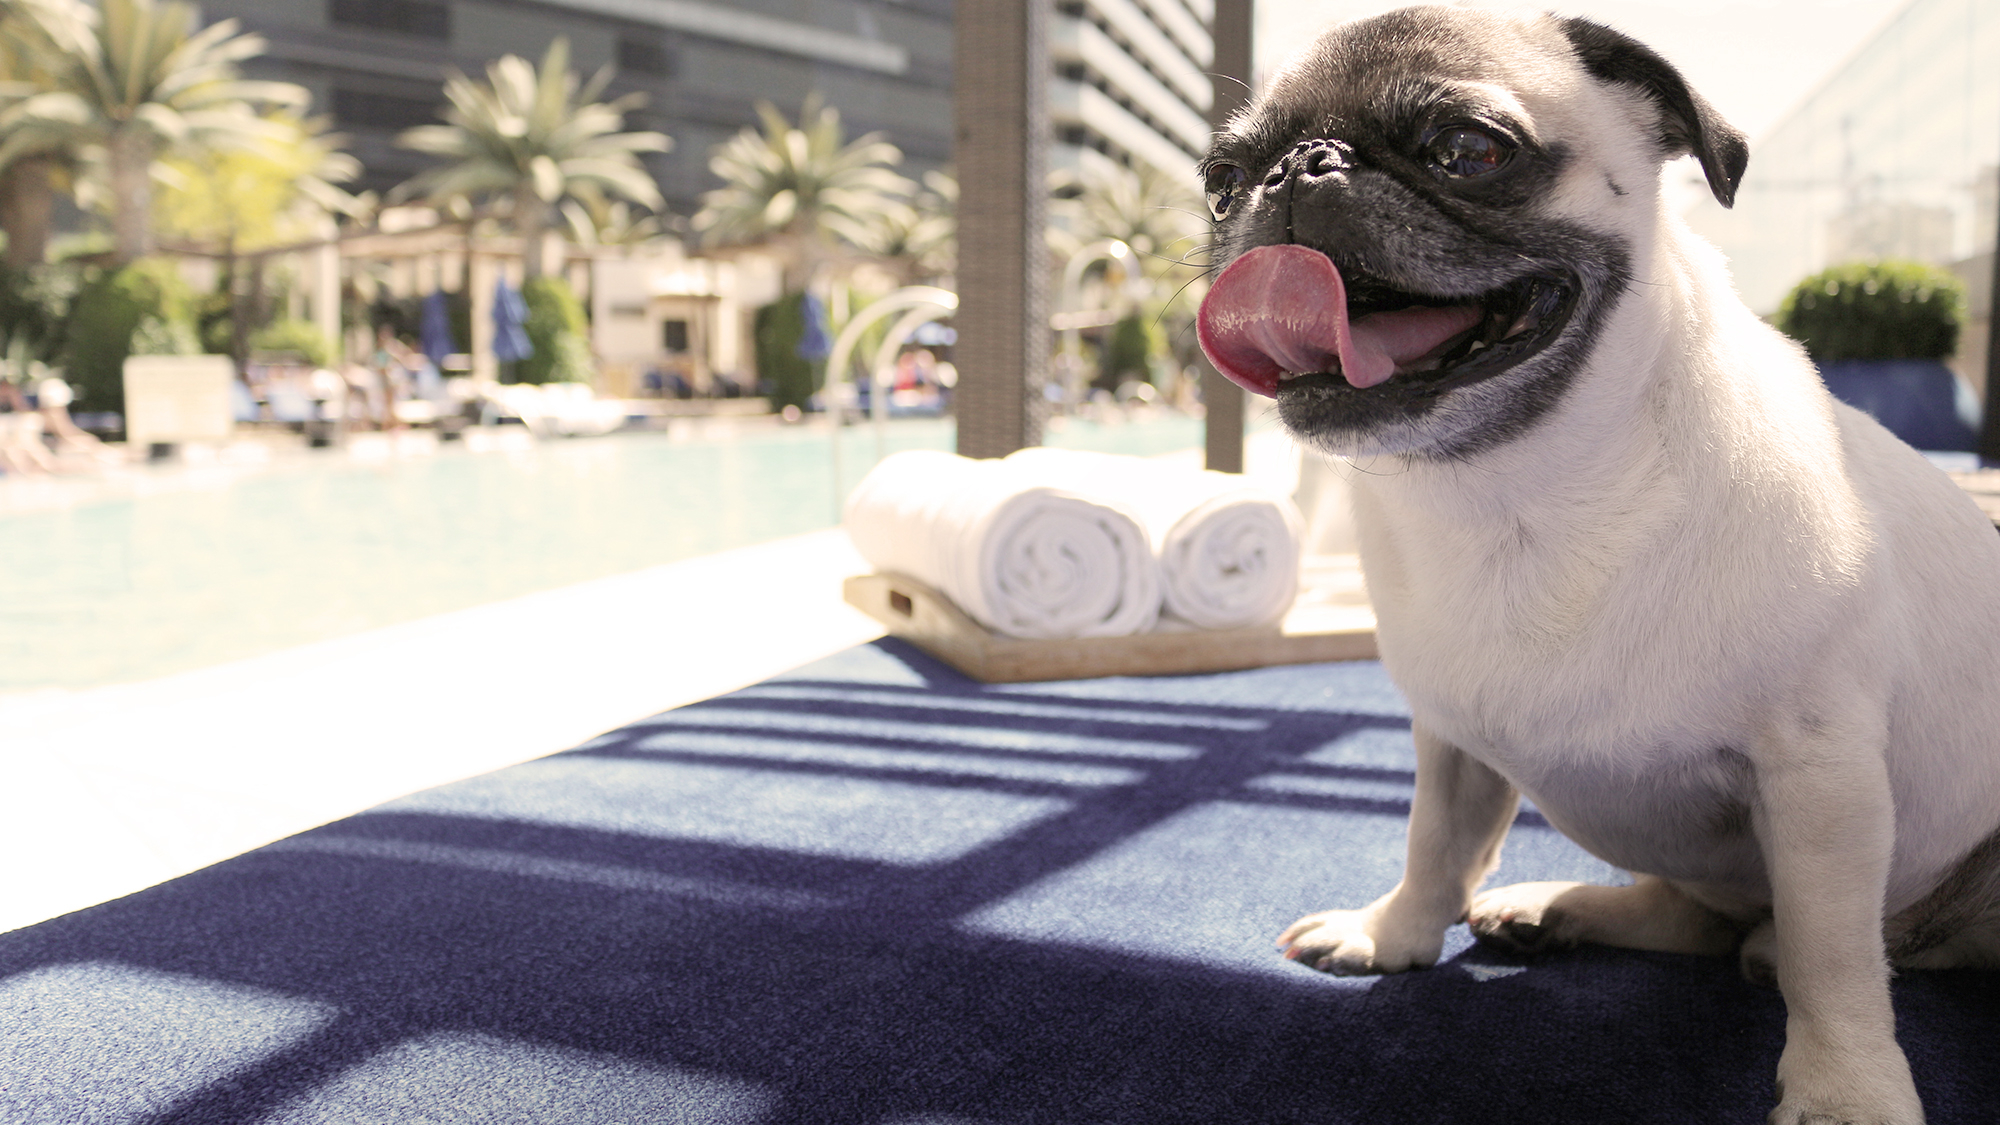 Dogs (almost) playing poker: Pets welcome at many Vegas hotels